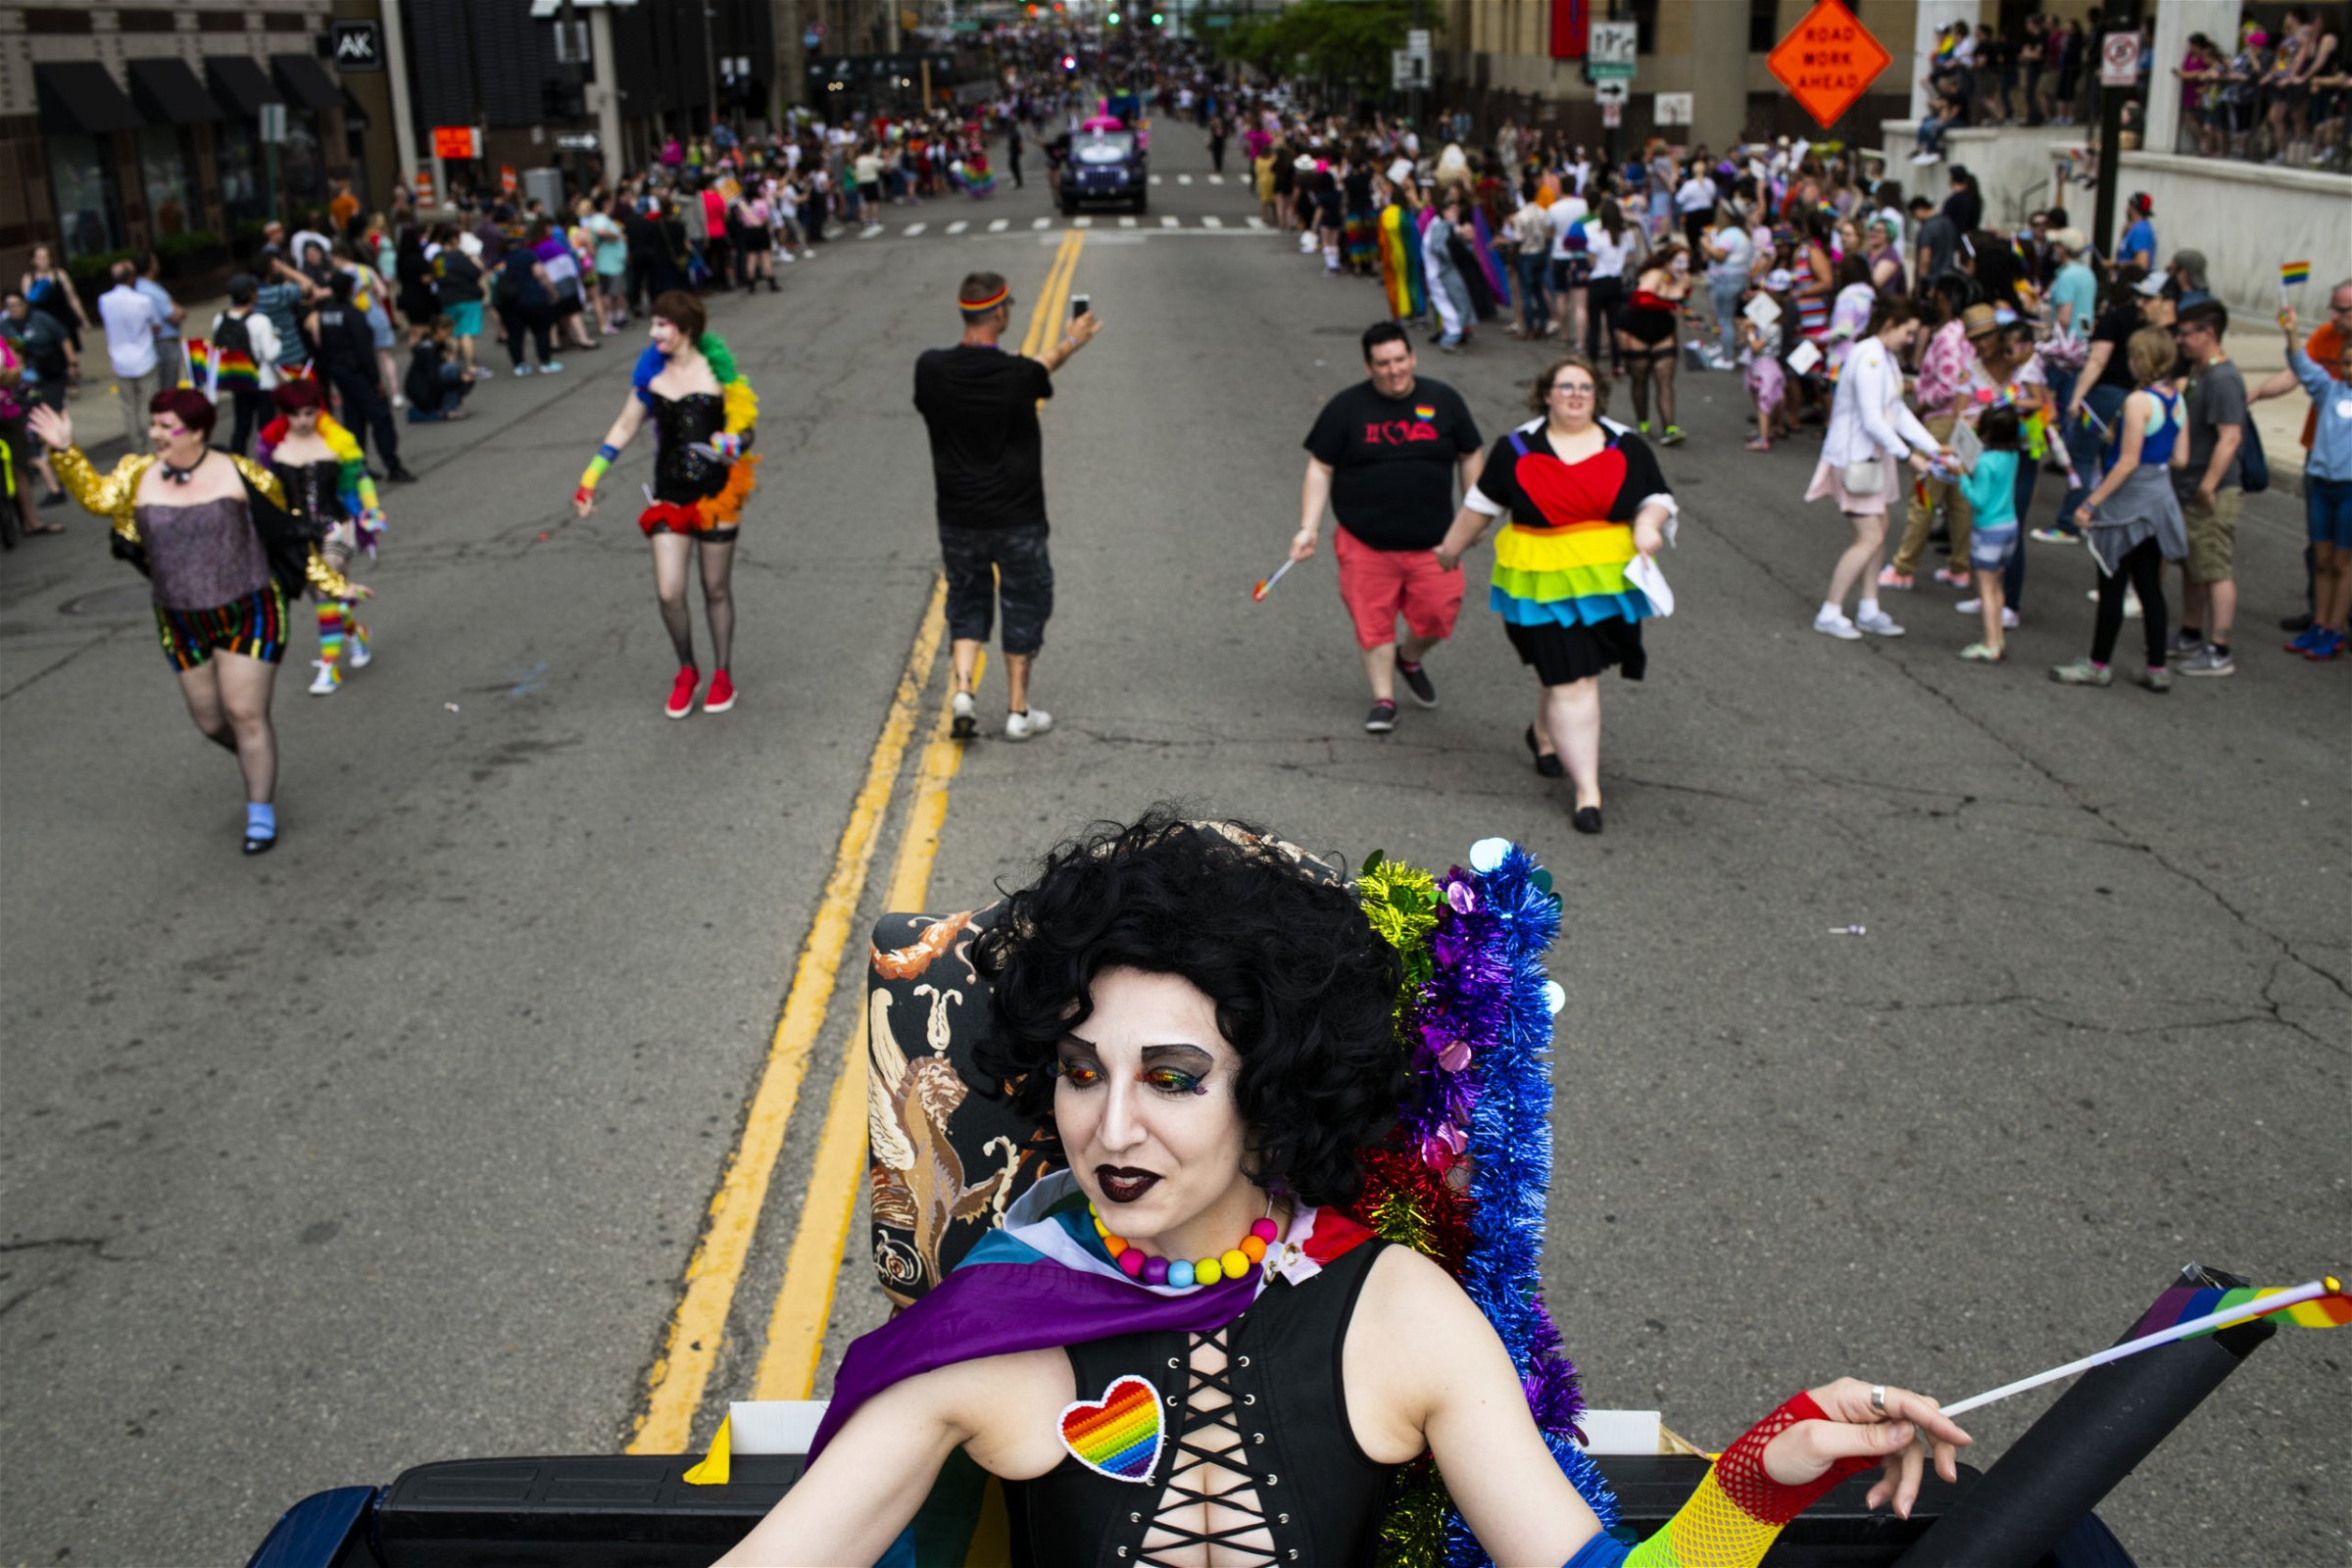 Playing Frankenfurter from "The Rocky Horror Picture Show," Lauren Montgomery, 34, rides in a truck making its way through the procession during the Motor City Pride Parade on June 9, 2019 in Detroit, Michigan. (Photo by Brittany Greeson/Getty Images)